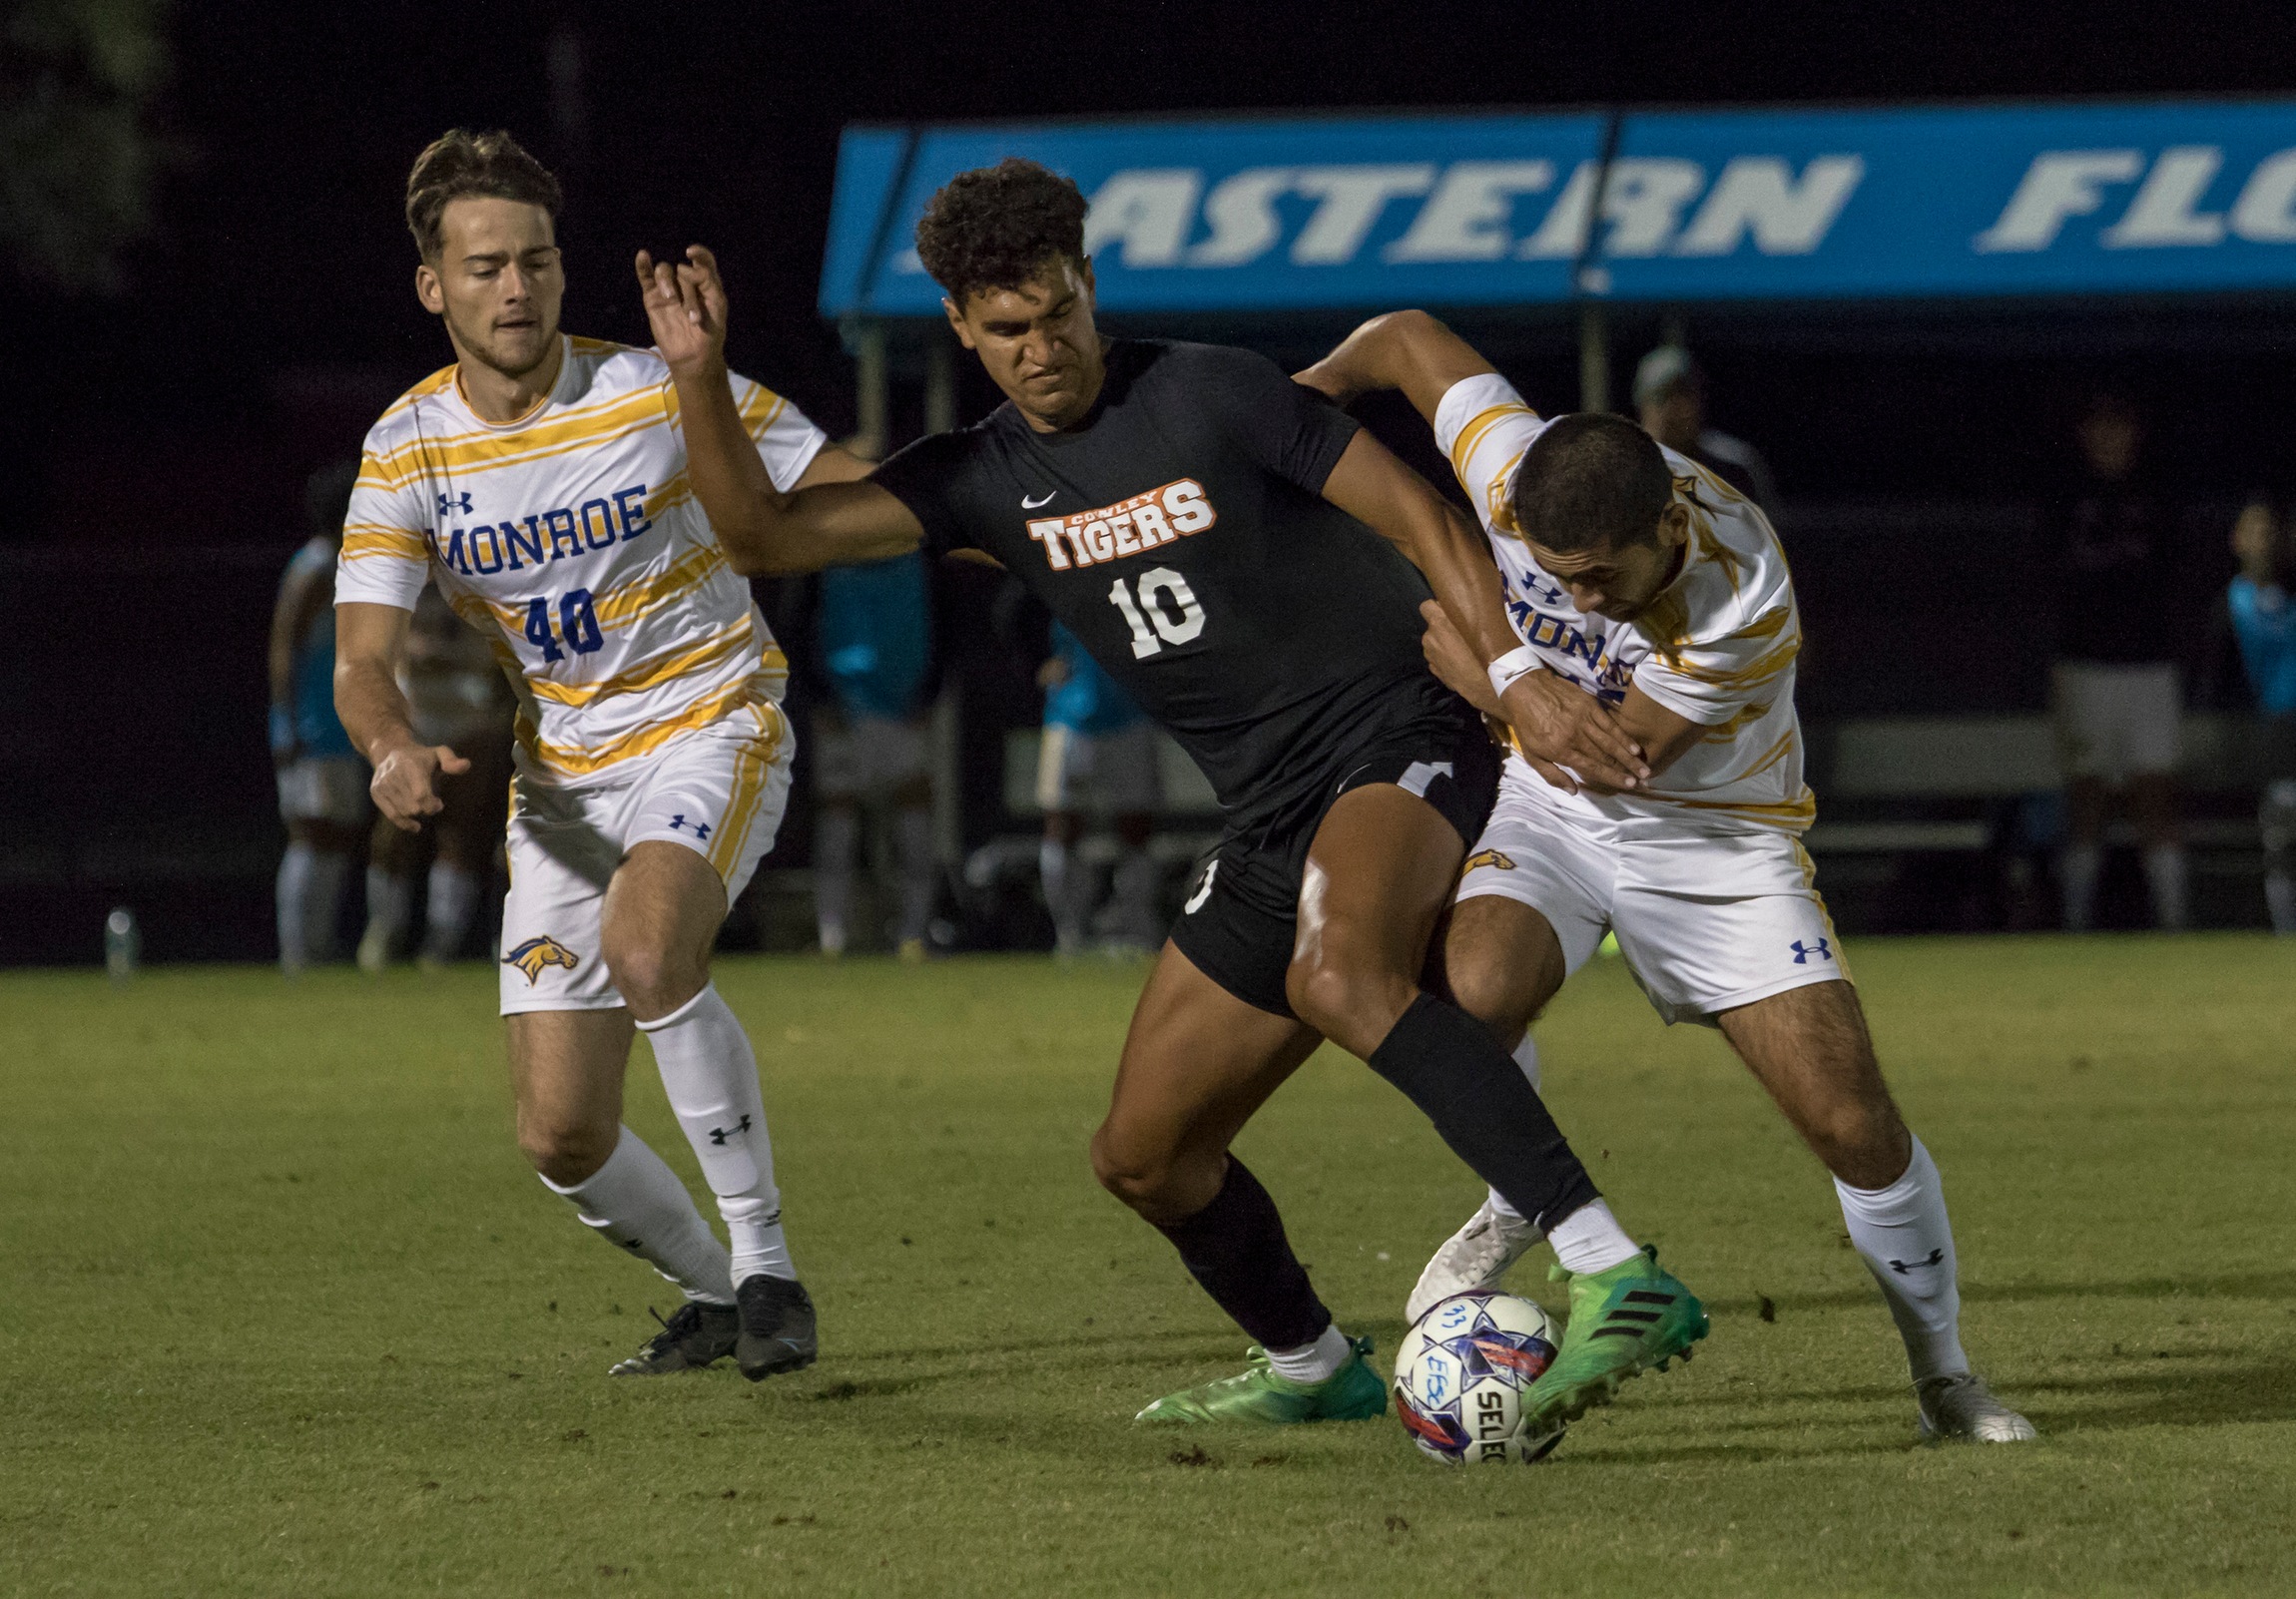 Tiger soccer team comes up just short of playing for a national title